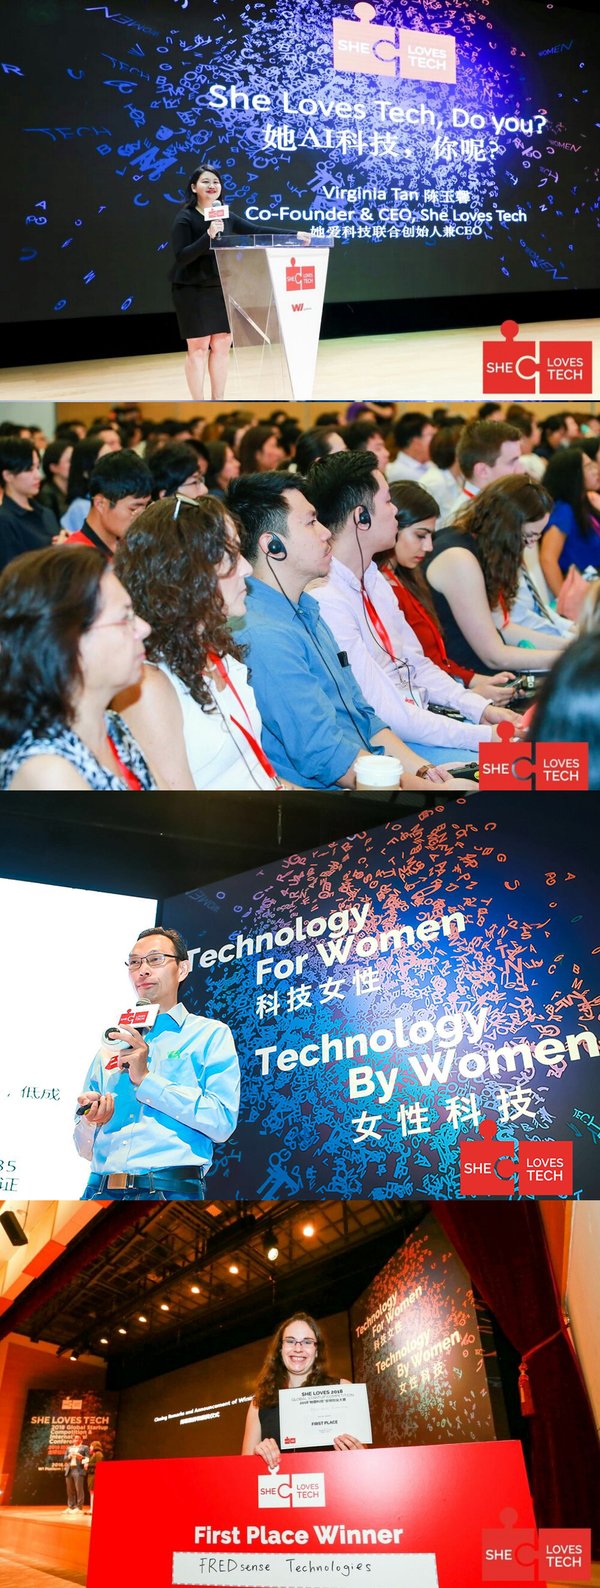 She Loves Tech 2018 Global Startup Competition & International Conference